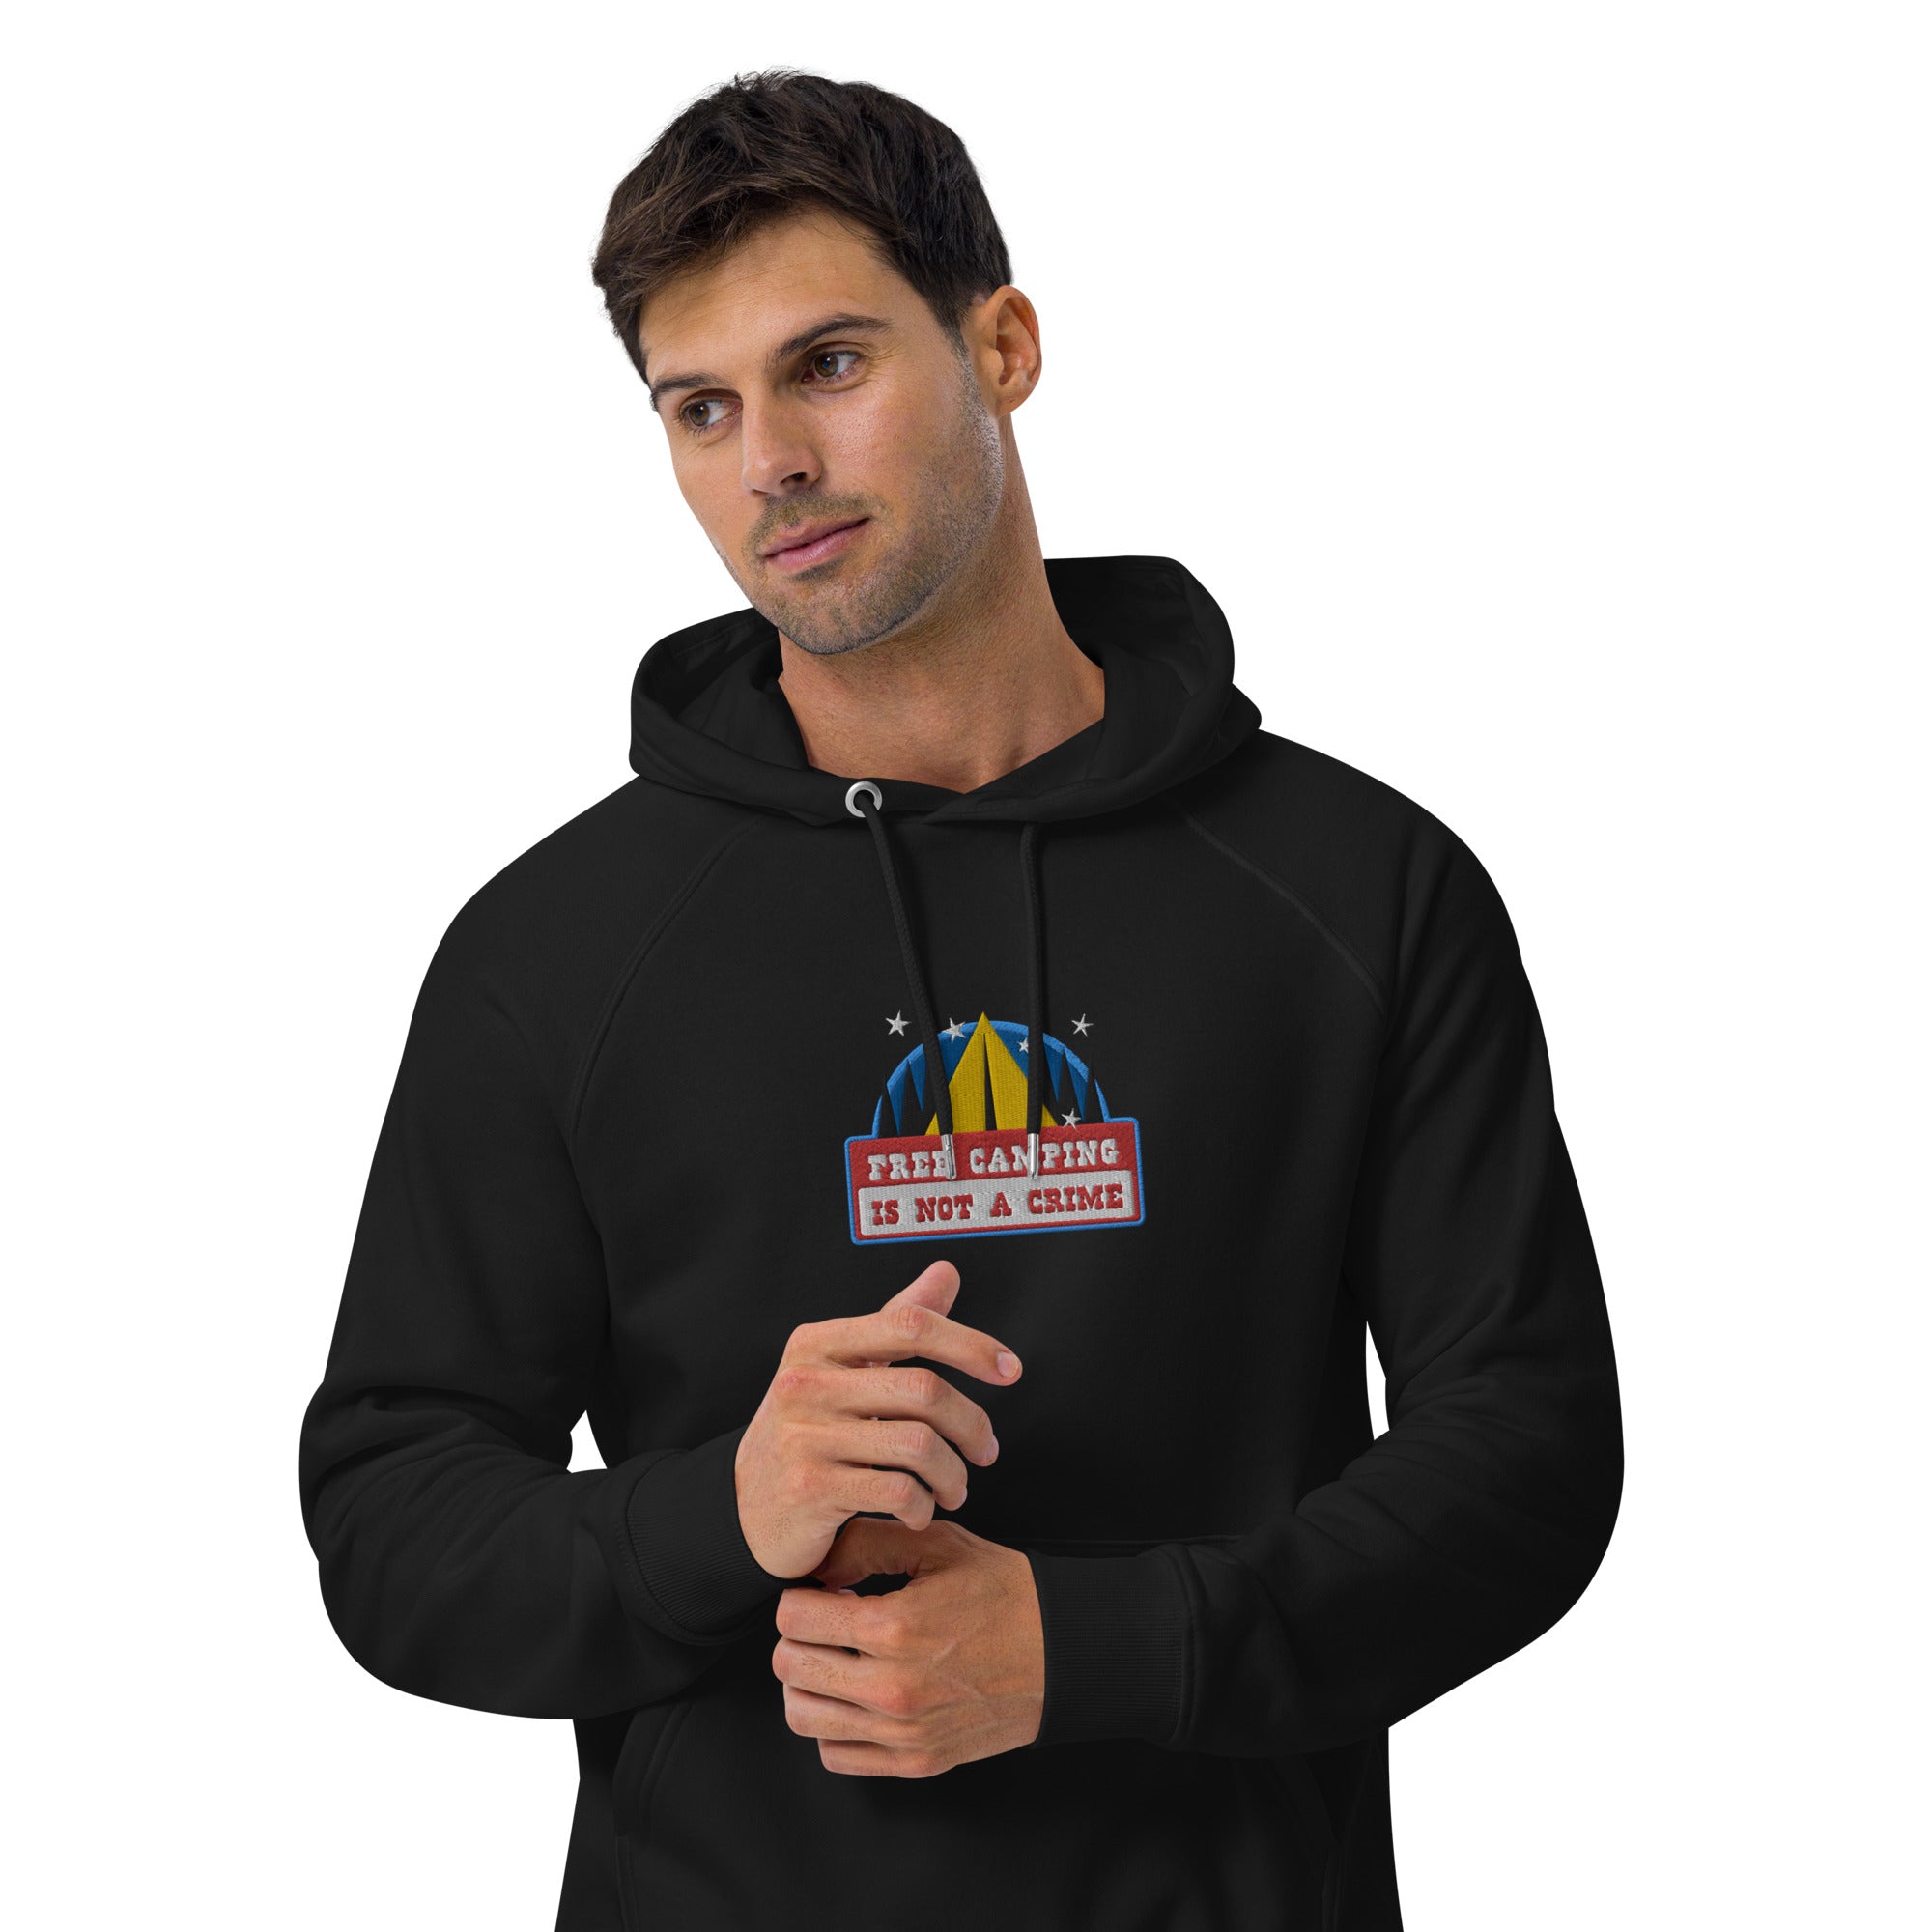 Unisex eco raglan hoodie Free camping is not a crime graphic multicolor embroidered pattern